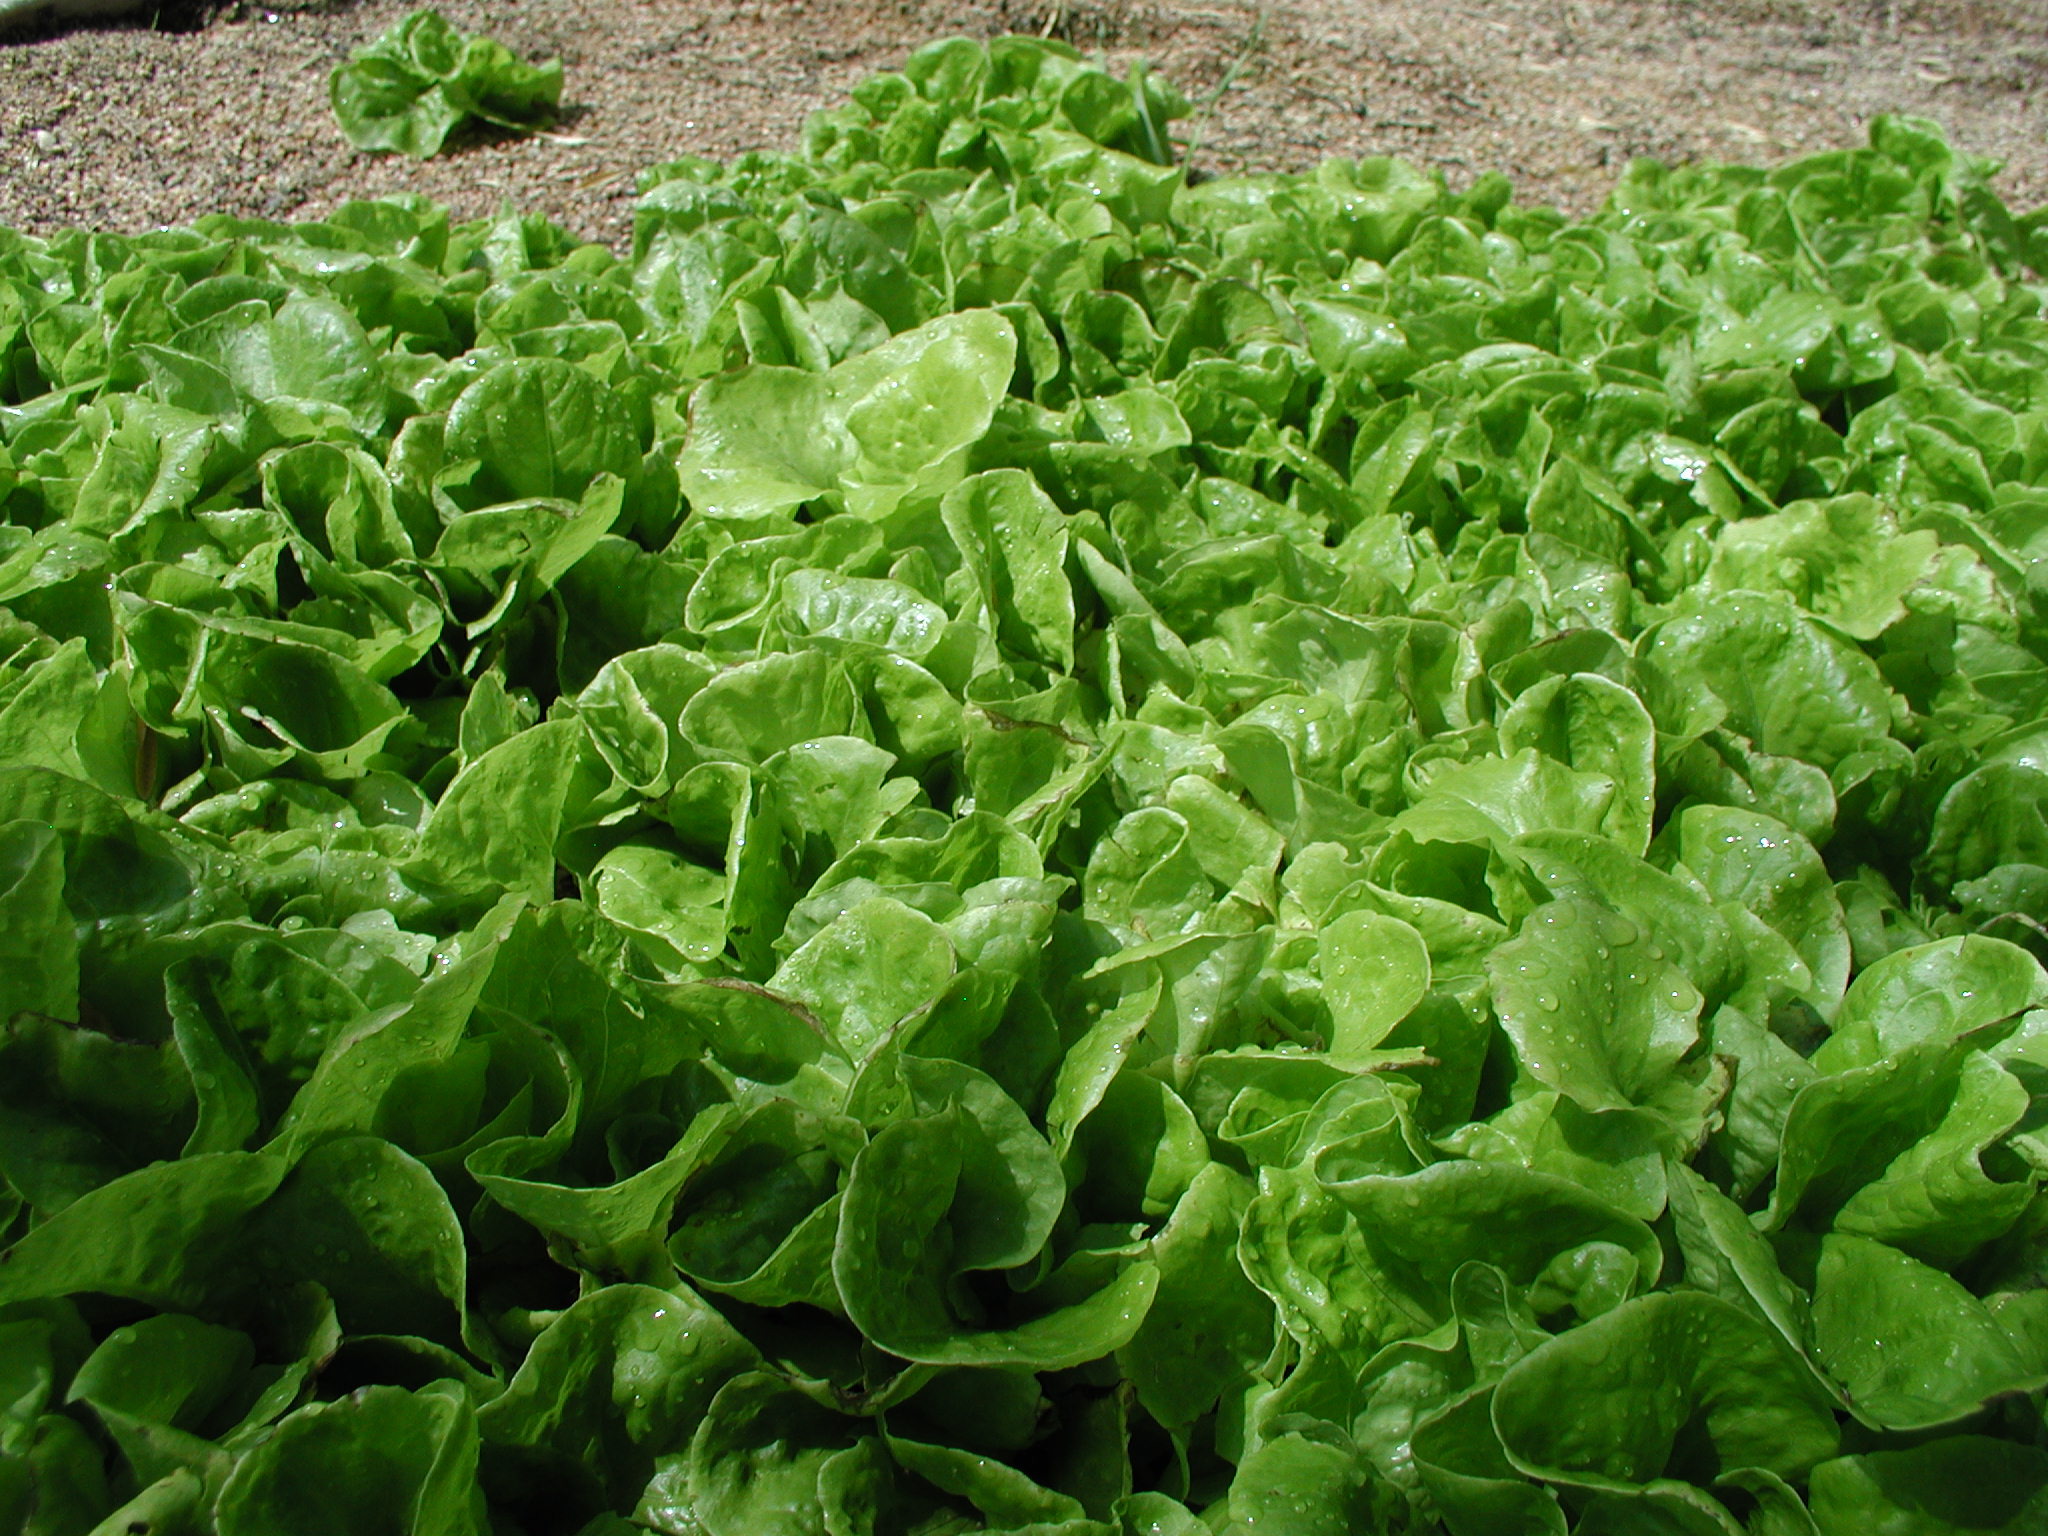 a lot of lettuce growing in a sand ploy